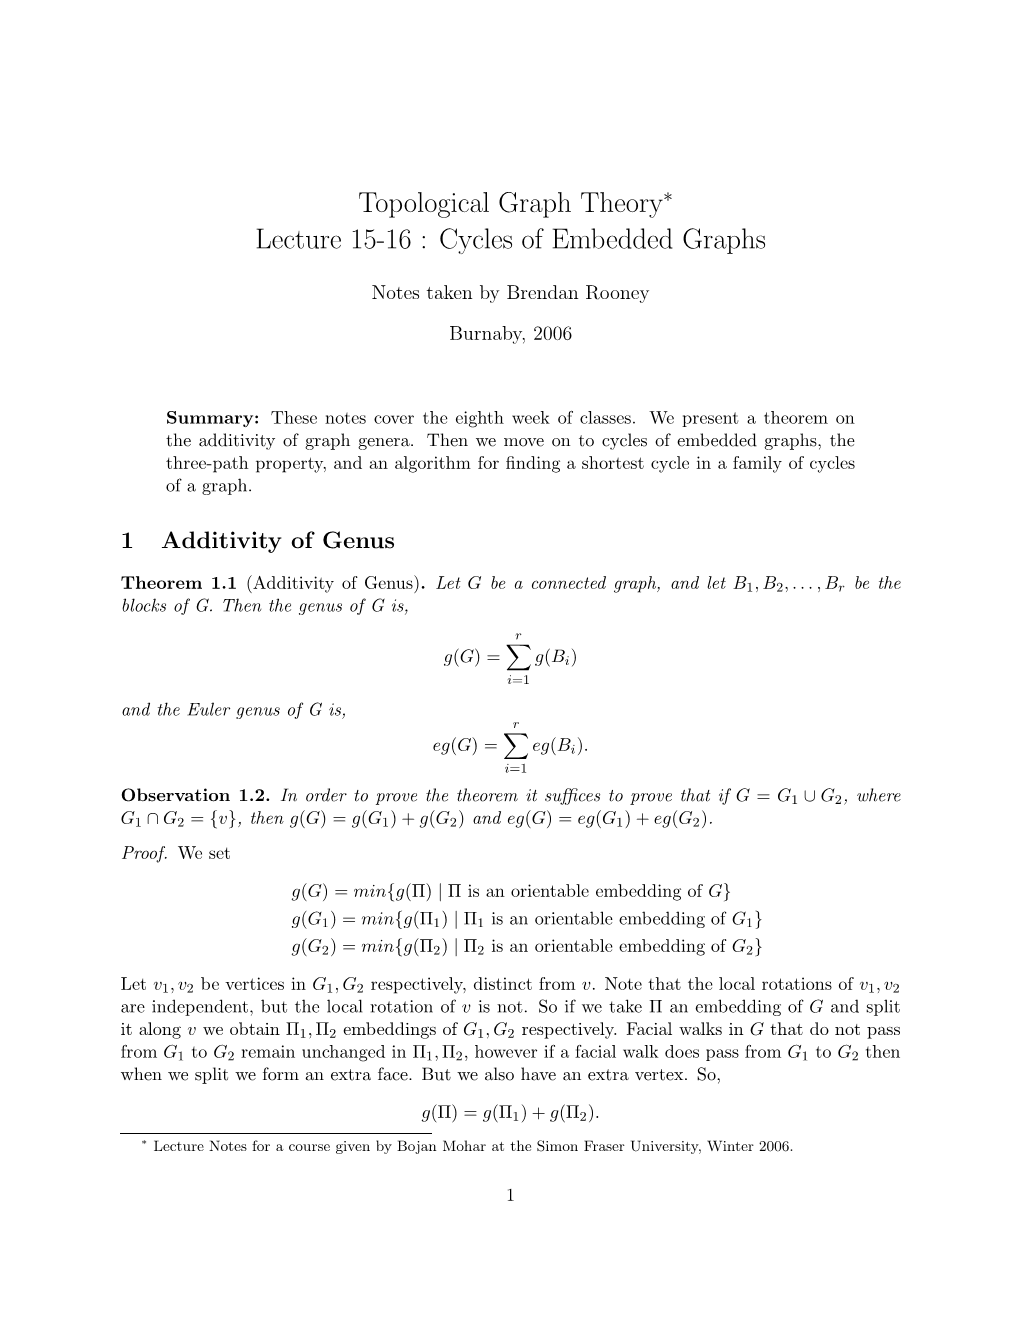 Topological Graph Theory Lecture 15-16 : Cycles of Embedded Graphs